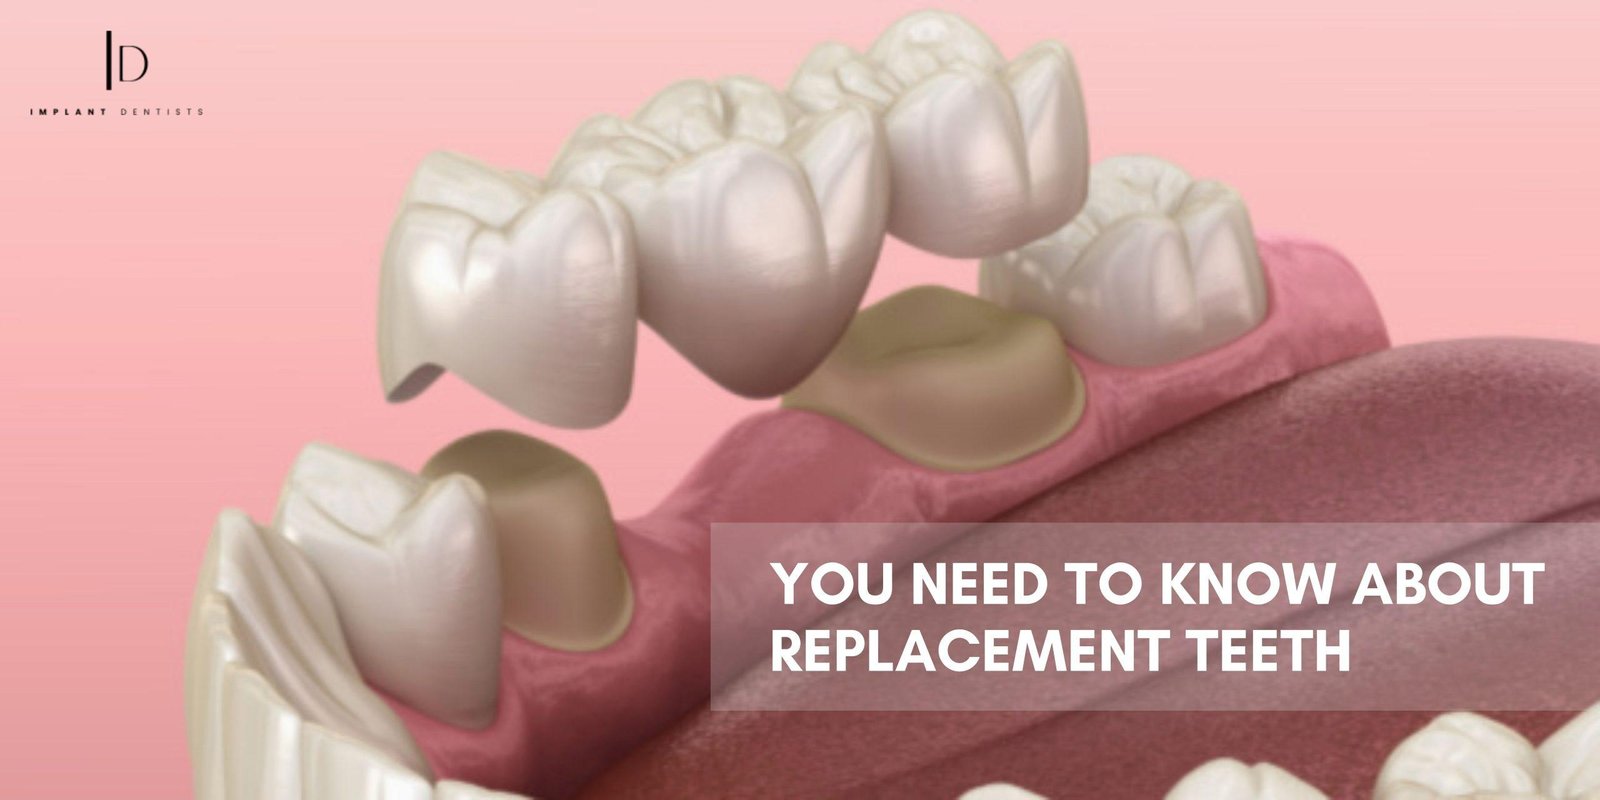 Restoring Your Smile | Everything You Need to Know About Replacement Teeth